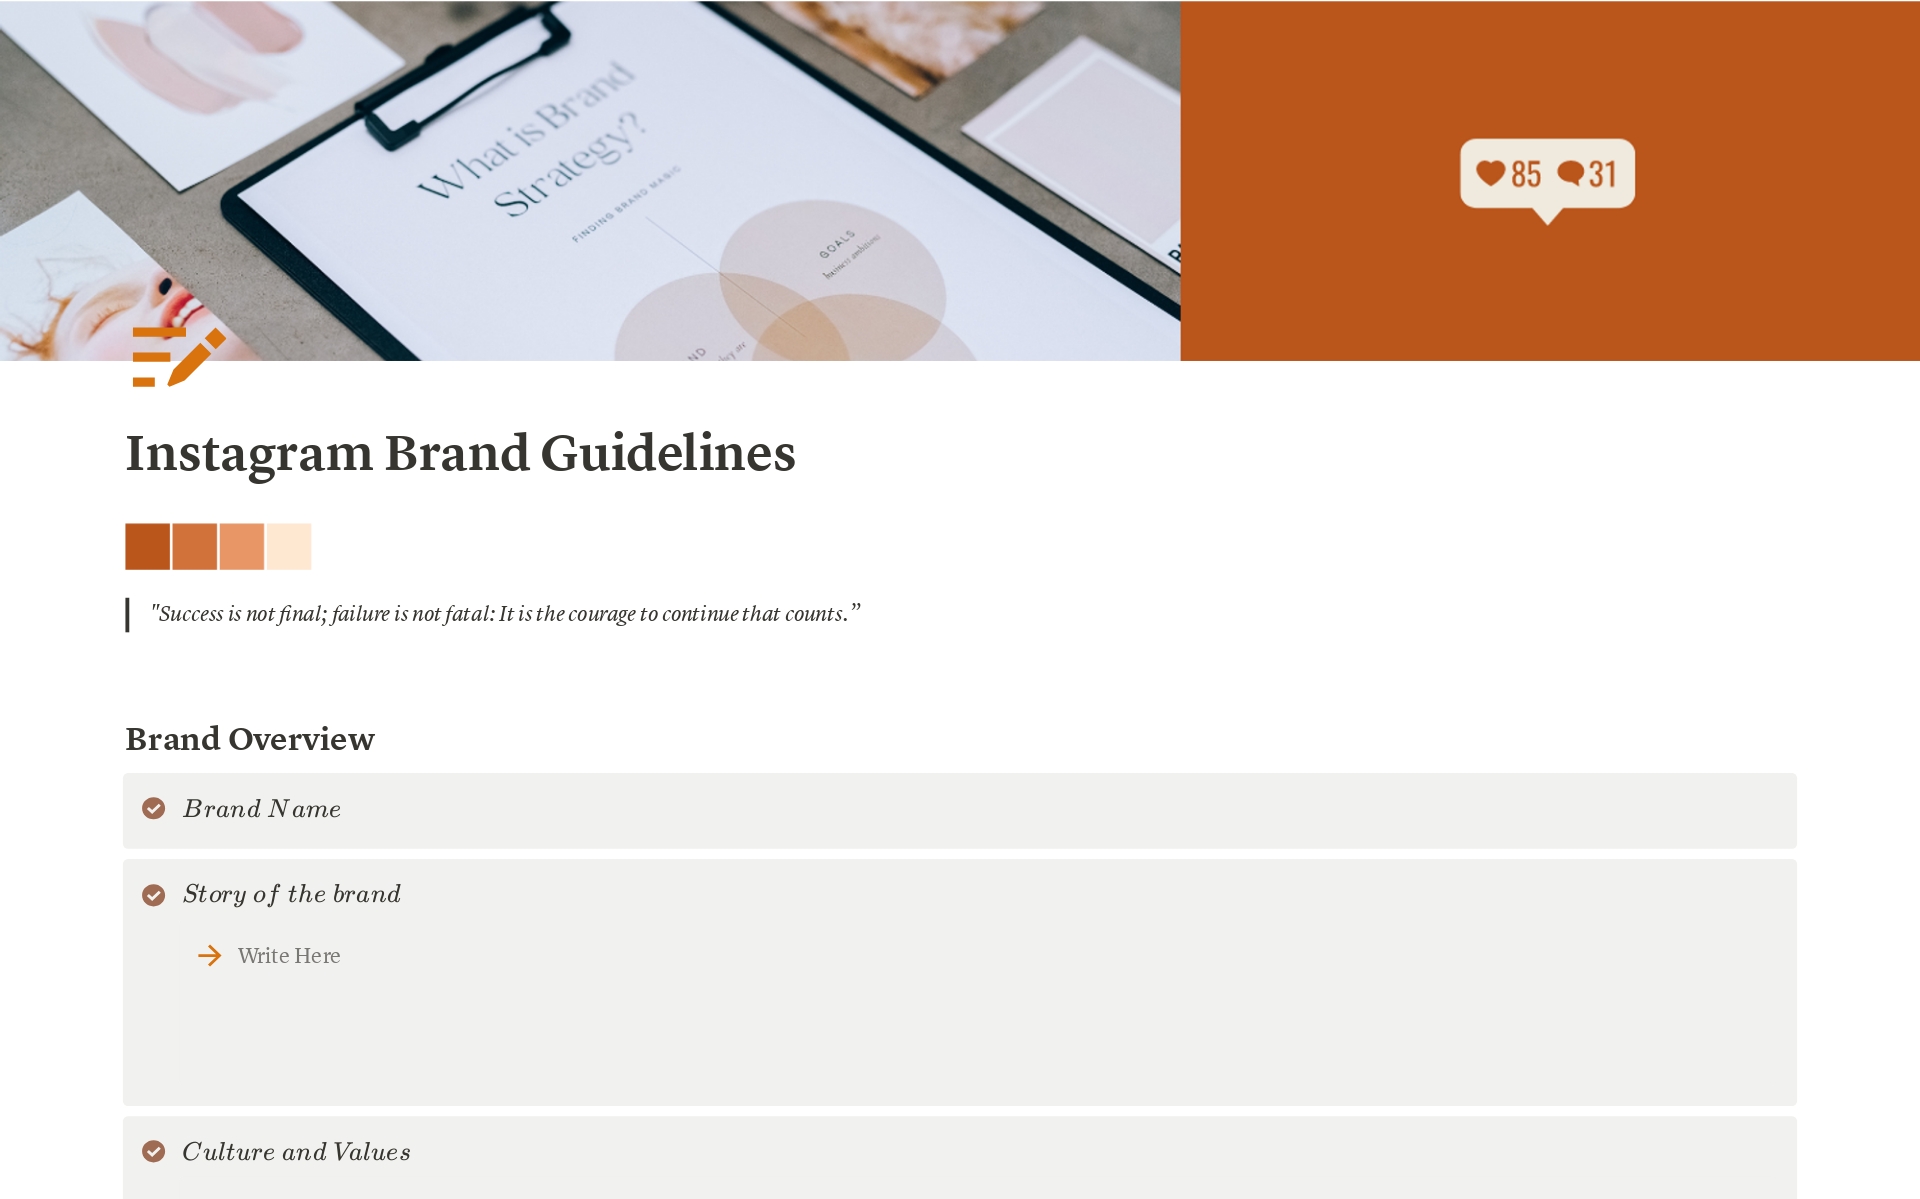 Get your Instagram Brand Guidelines on point with this simple template
 
Who is this for?

- You use Notion
- You need an EASY template to get an overview of your brand personality
- You want room for customization